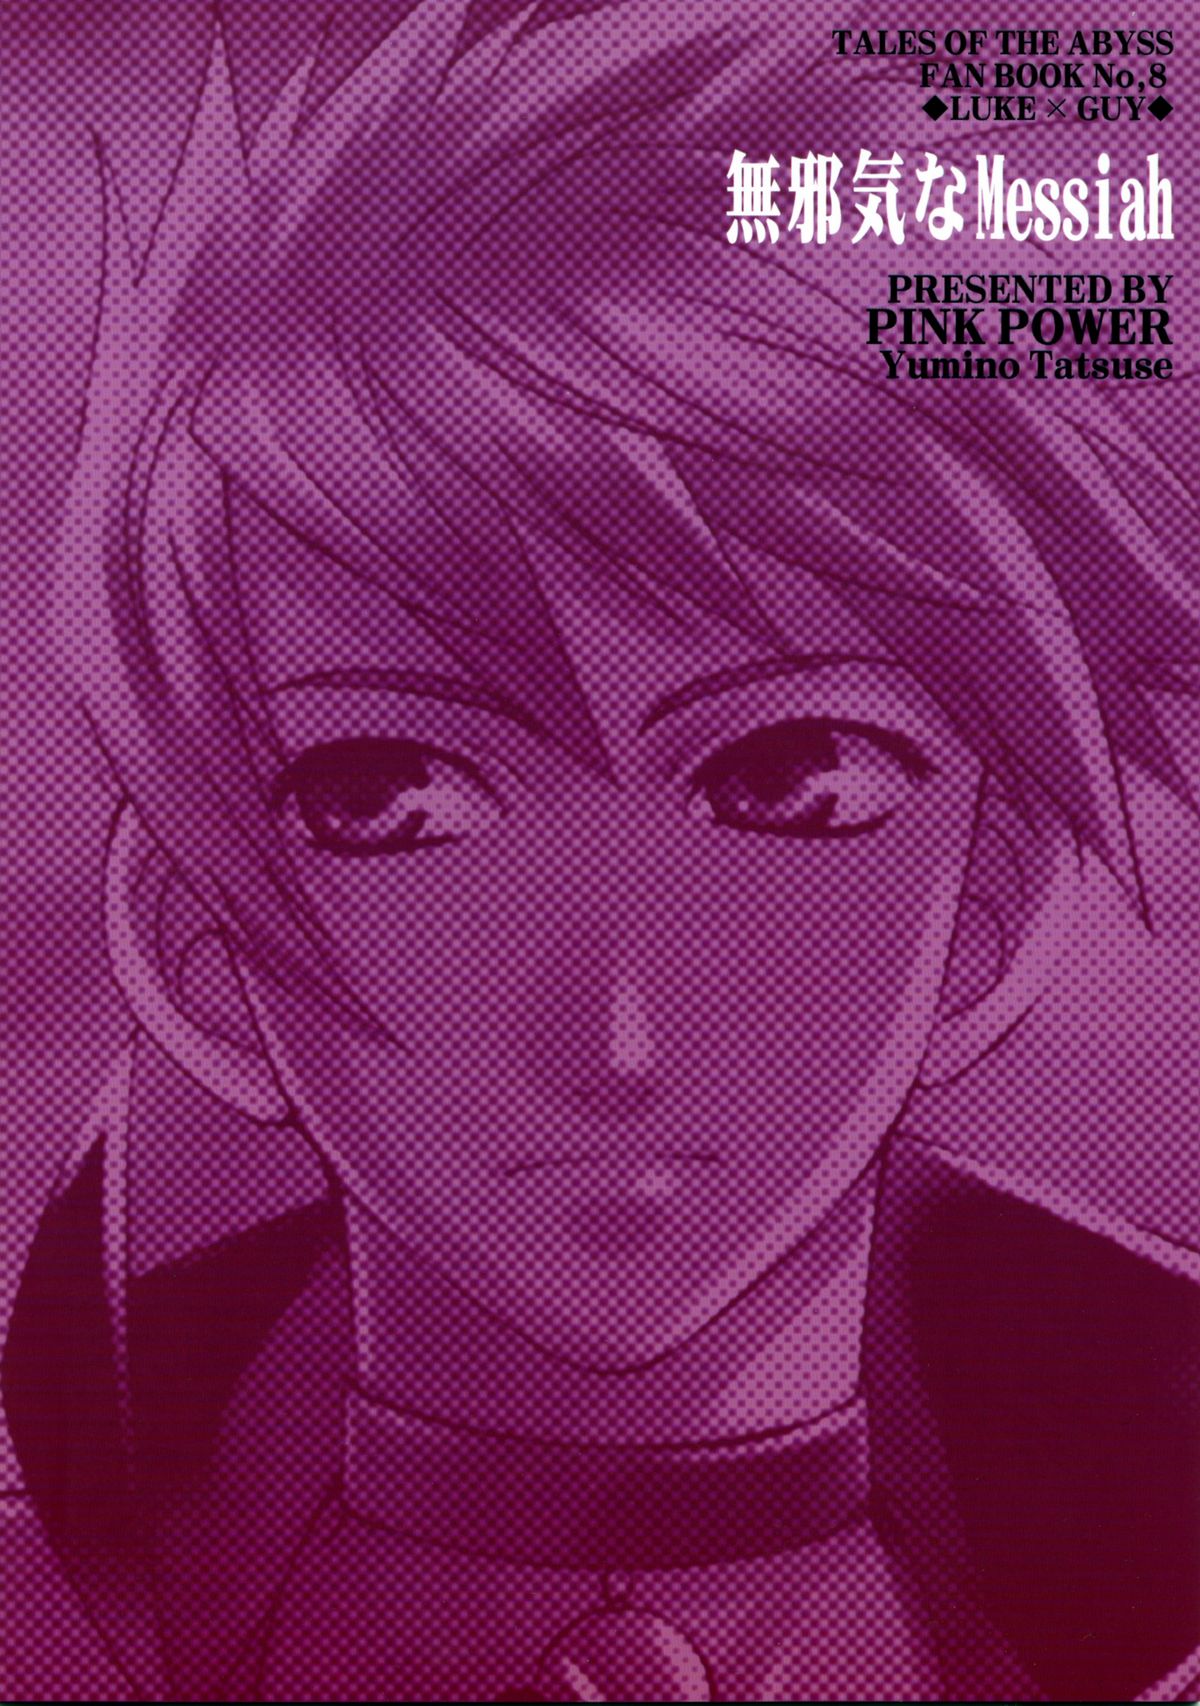 [PINK POWER]  Mujaki na Messiah (tales of the abyss) 